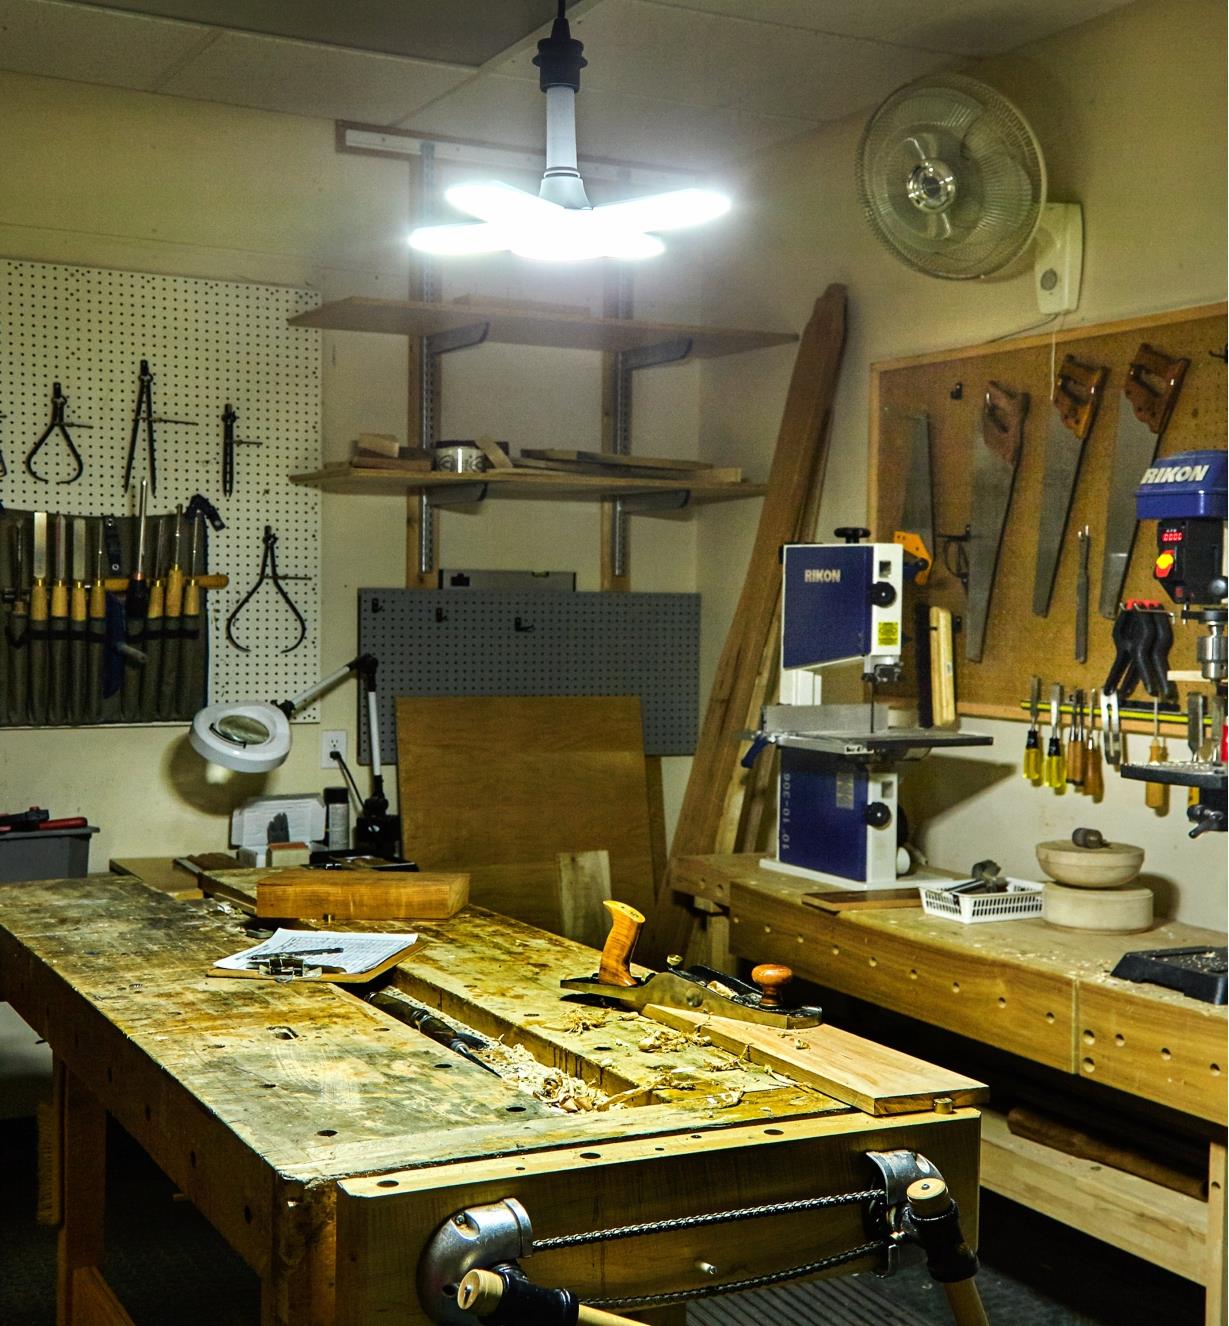 A directional LED ceiling light installed over a workbench to illuminate a workshop